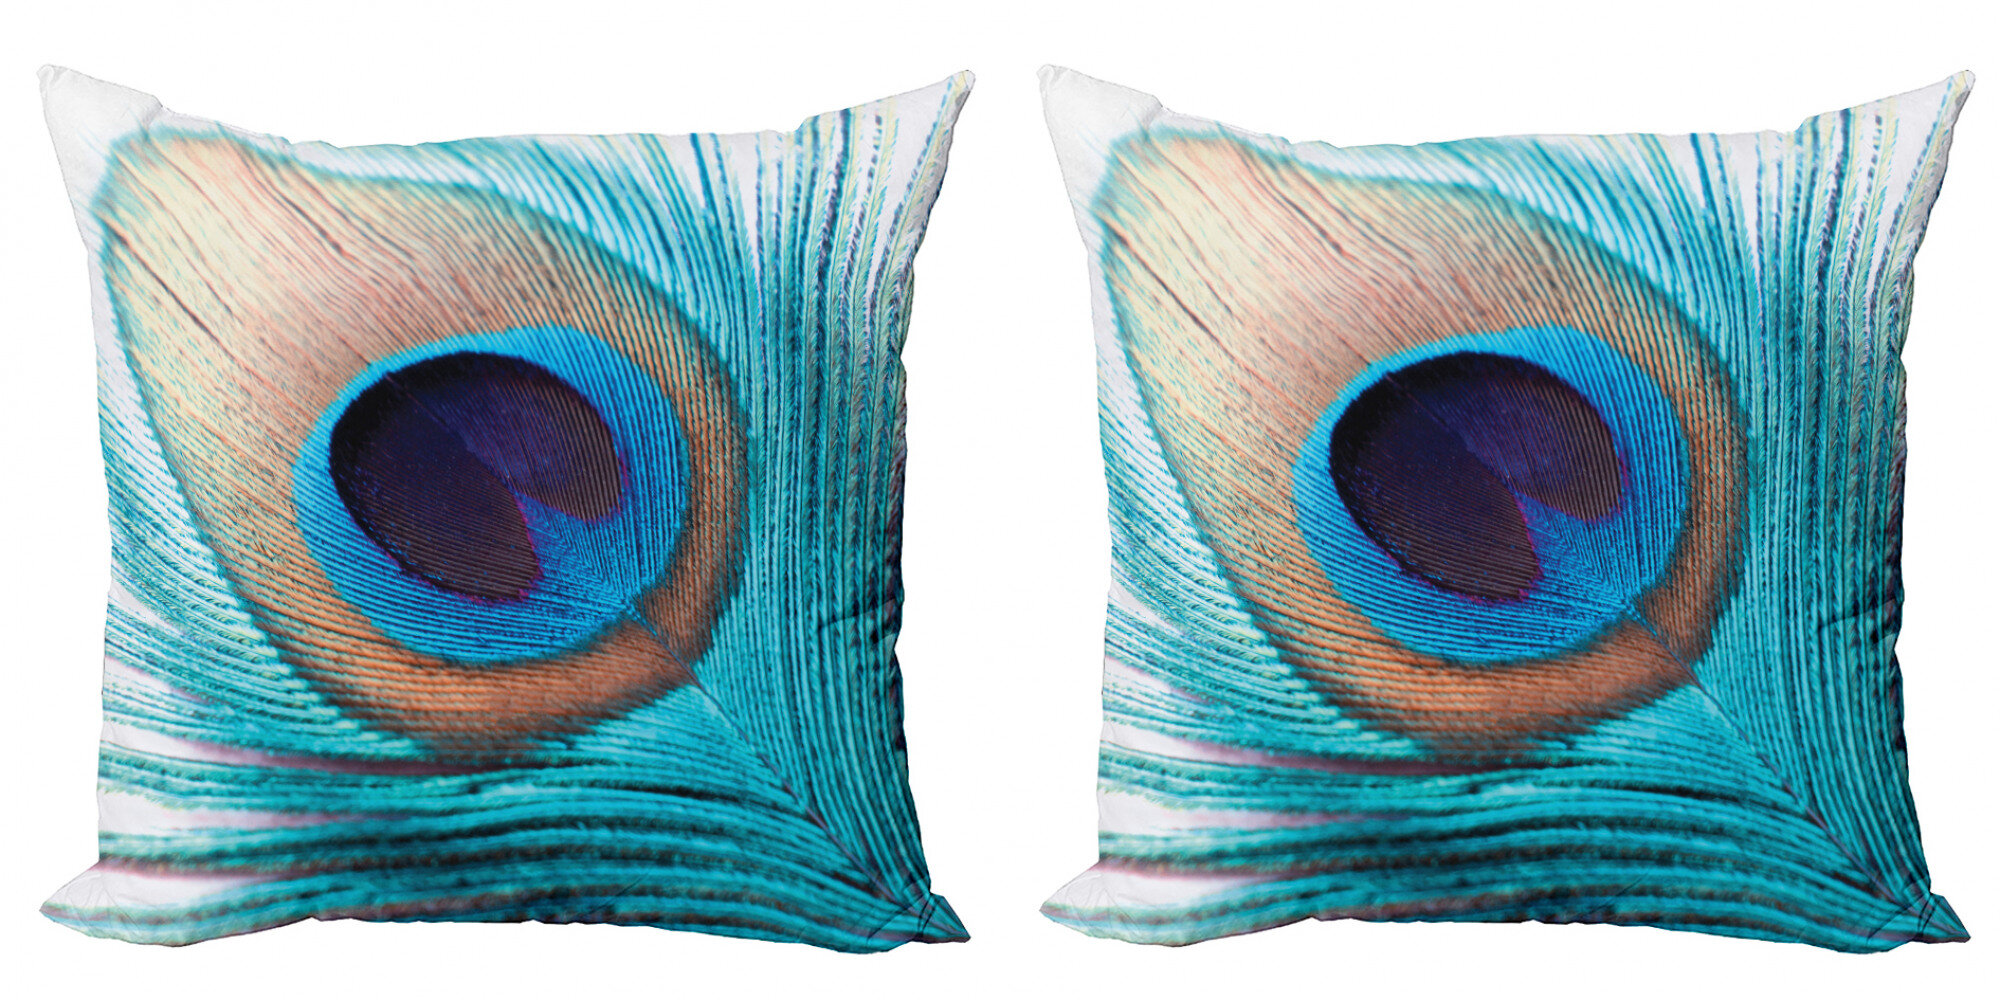 New Living Series Square Throw Pillow Case Cushion Cover Peacock 18" x 18" 